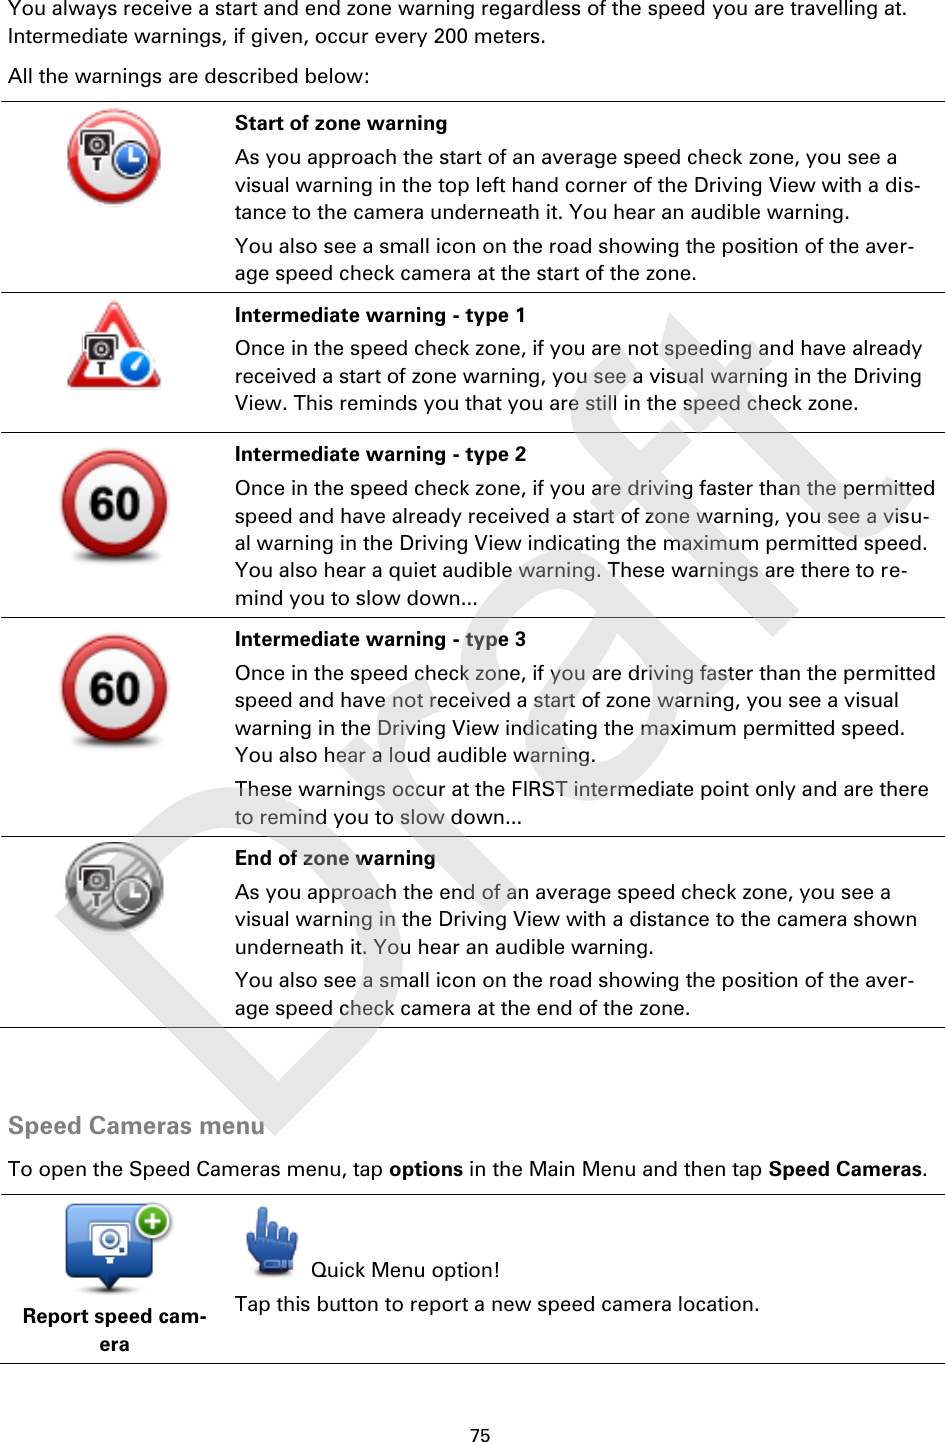 75    You always receive a start and end zone warning regardless of the speed you are travelling at. Intermediate warnings, if given, occur every 200 meters. All the warnings are described below:   Start of zone warning As you approach the start of an average speed check zone, you see a visual warning in the top left hand corner of the Driving View with a dis-tance to the camera underneath it. You hear an audible warning. You also see a small icon on the road showing the position of the aver-age speed check camera at the start of the zone.   Intermediate warning - type 1 Once in the speed check zone, if you are not speeding and have already received a start of zone warning, you see a visual warning in the Driving View. This reminds you that you are still in the speed check zone.   Intermediate warning - type 2 Once in the speed check zone, if you are driving faster than the permitted speed and have already received a start of zone warning, you see a visu-al warning in the Driving View indicating the maximum permitted speed. You also hear a quiet audible warning. These warnings are there to re-mind you to slow down...   Intermediate warning - type 3 Once in the speed check zone, if you are driving faster than the permitted speed and have not received a start of zone warning, you see a visual warning in the Driving View indicating the maximum permitted speed. You also hear a loud audible warning. These warnings occur at the FIRST intermediate point only and are there to remind you to slow down...   End of zone warning As you approach the end of an average speed check zone, you see a visual warning in the Driving View with a distance to the camera shown underneath it. You hear an audible warning. You also see a small icon on the road showing the position of the aver-age speed check camera at the end of the zone.   Speed Cameras menu To open the Speed Cameras menu, tap options in the Main Menu and then tap Speed Cameras.  Report speed cam-era  Quick Menu option! Tap this button to report a new speed camera location. Draft